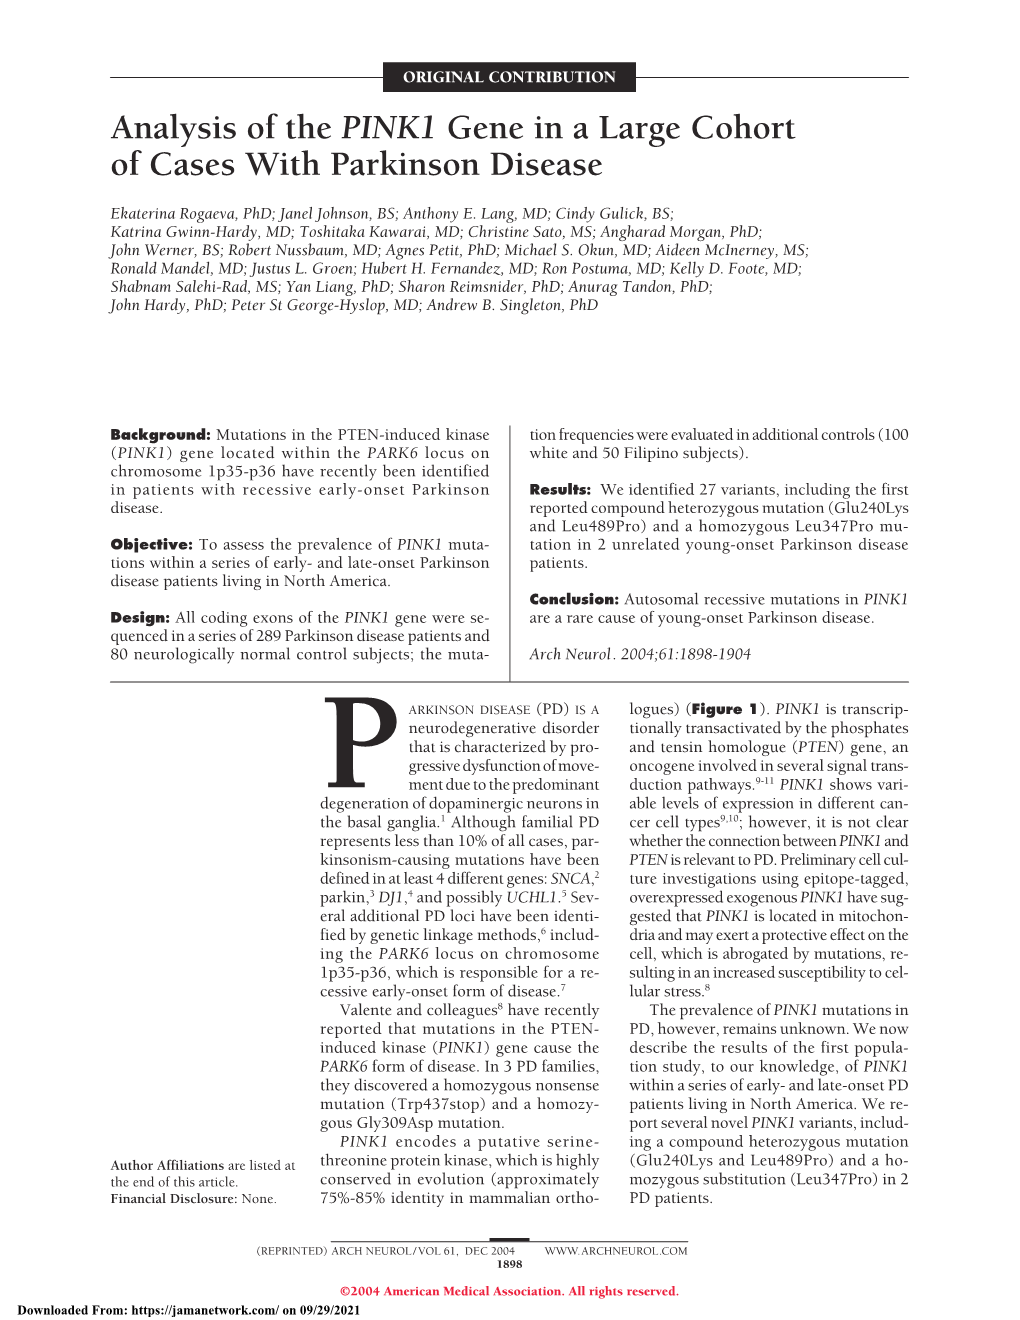 Analysis of the PINK1 Gene in a Large Cohort of Cases with Parkinson Disease